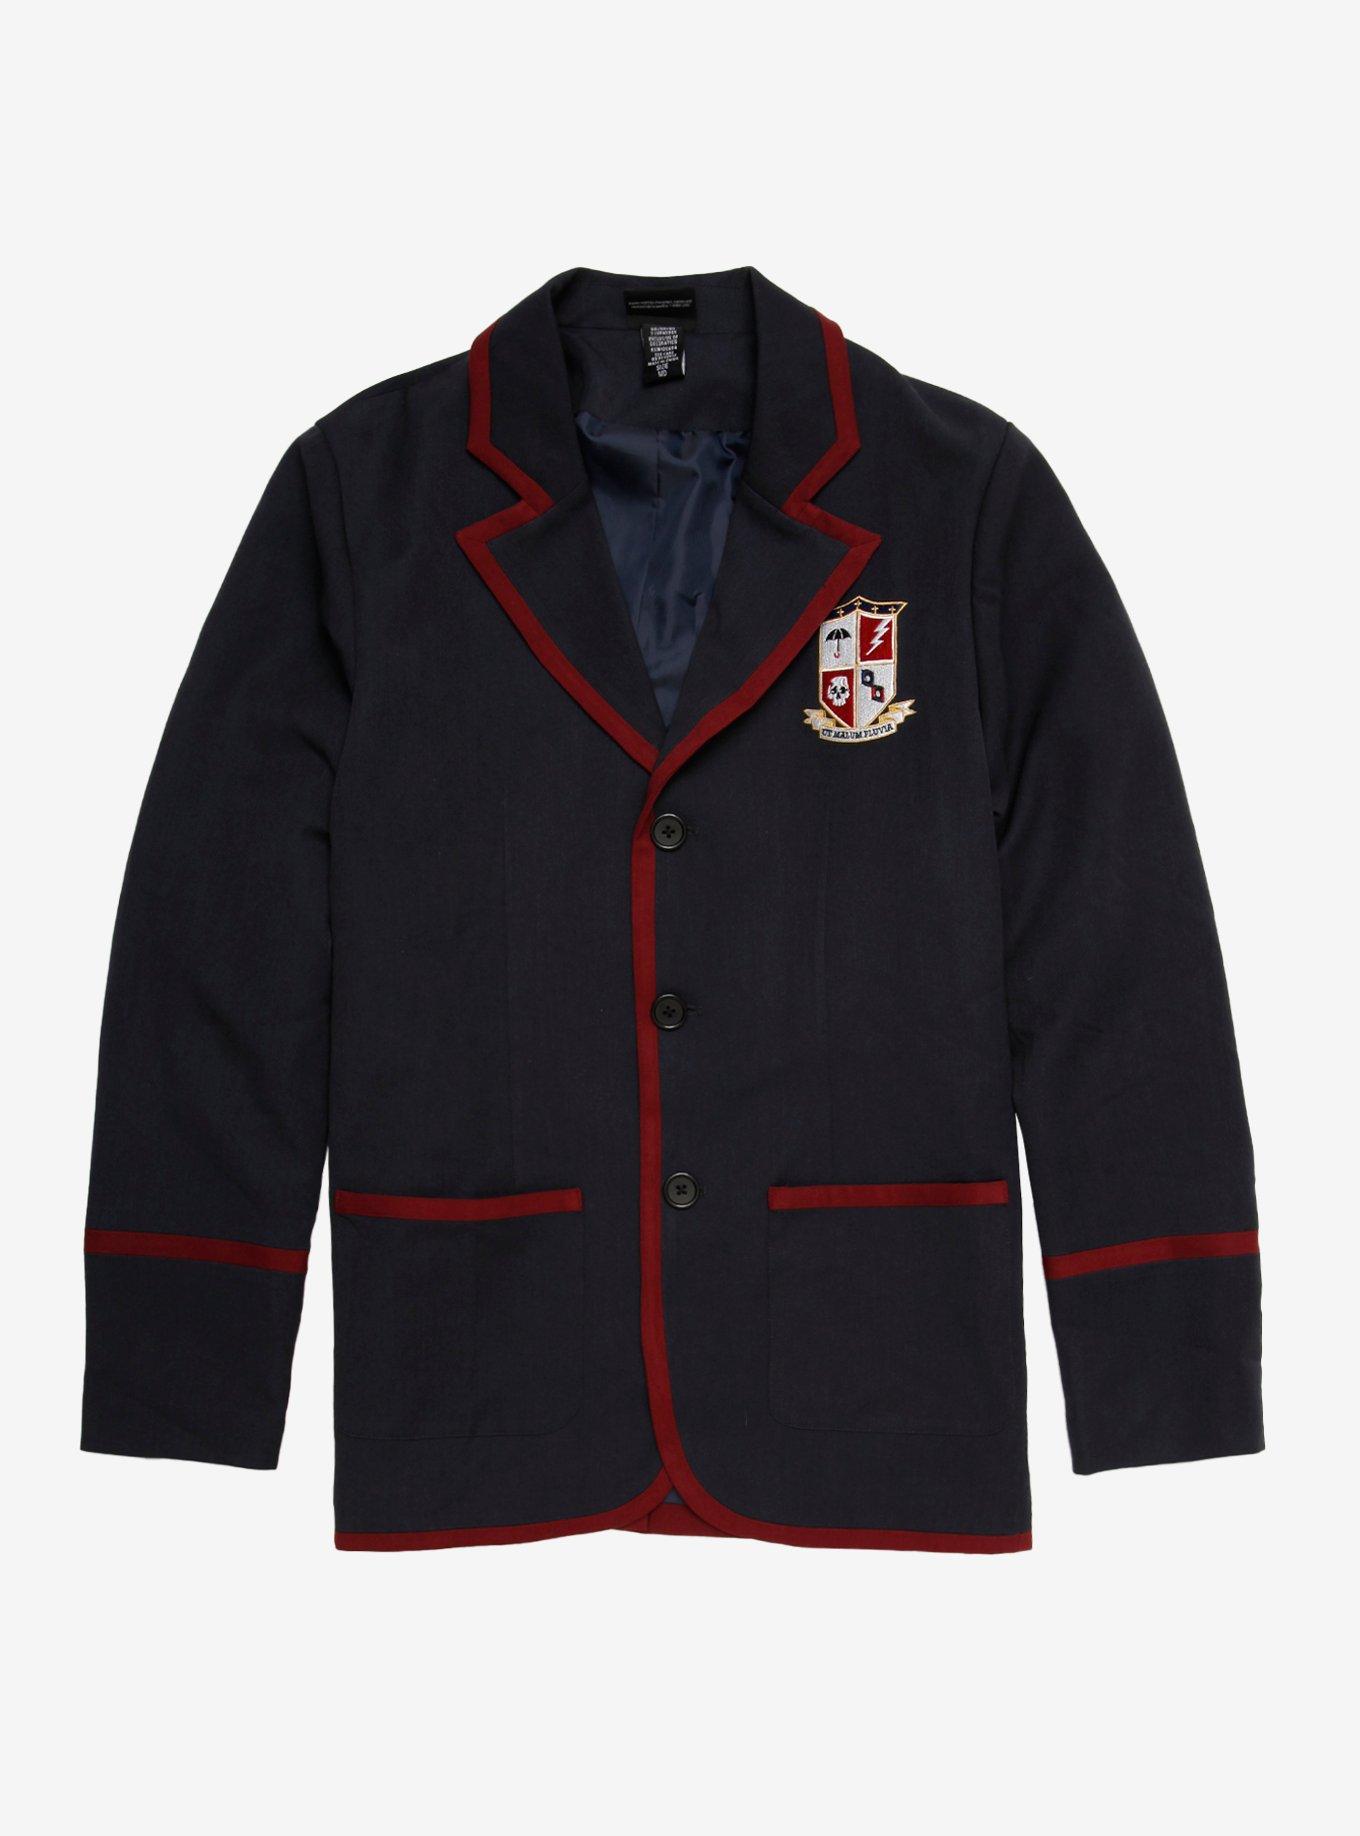 A blazer that will make you part of the Hargreeves family (The Umbrella Academy)